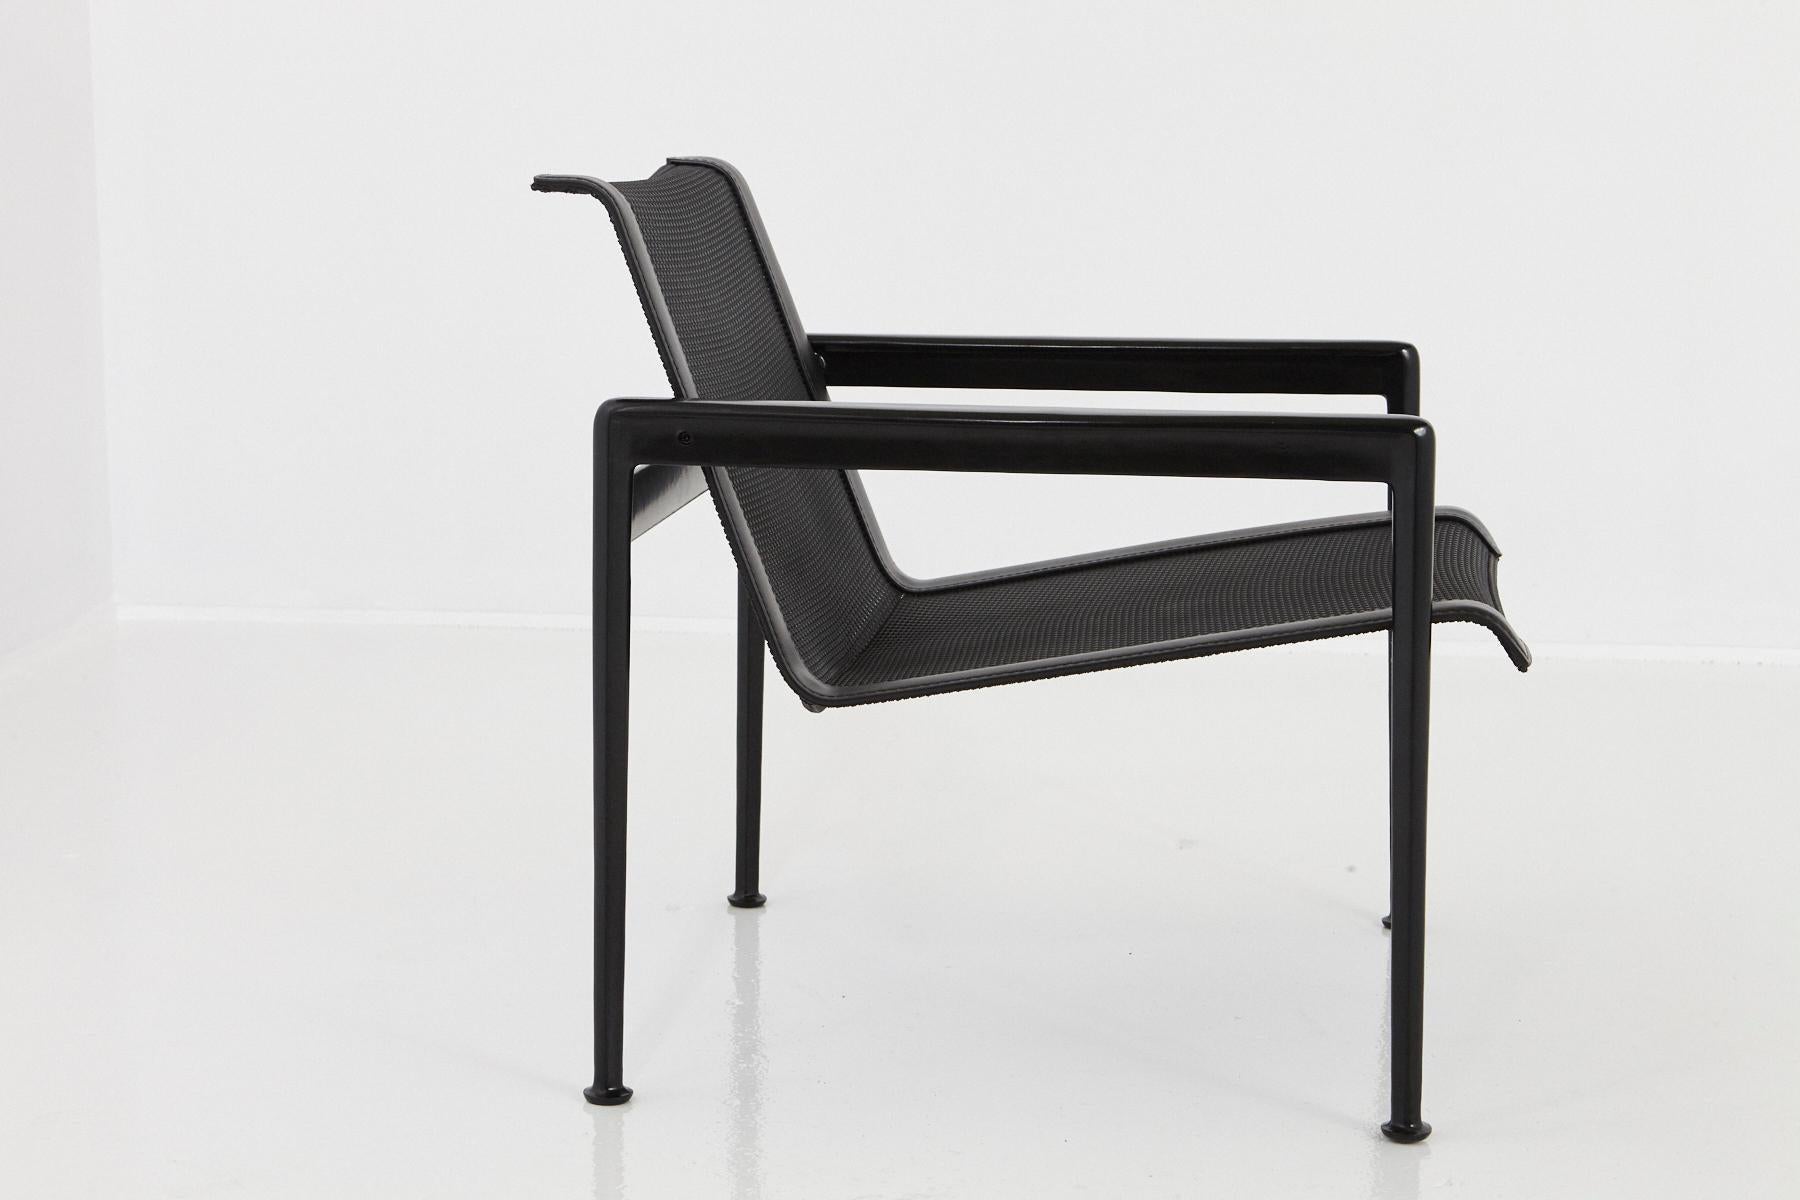 Mid-Century Modern Richard Schultz All Black Garden Lounge Chair from the '1966 Collection' For Sale